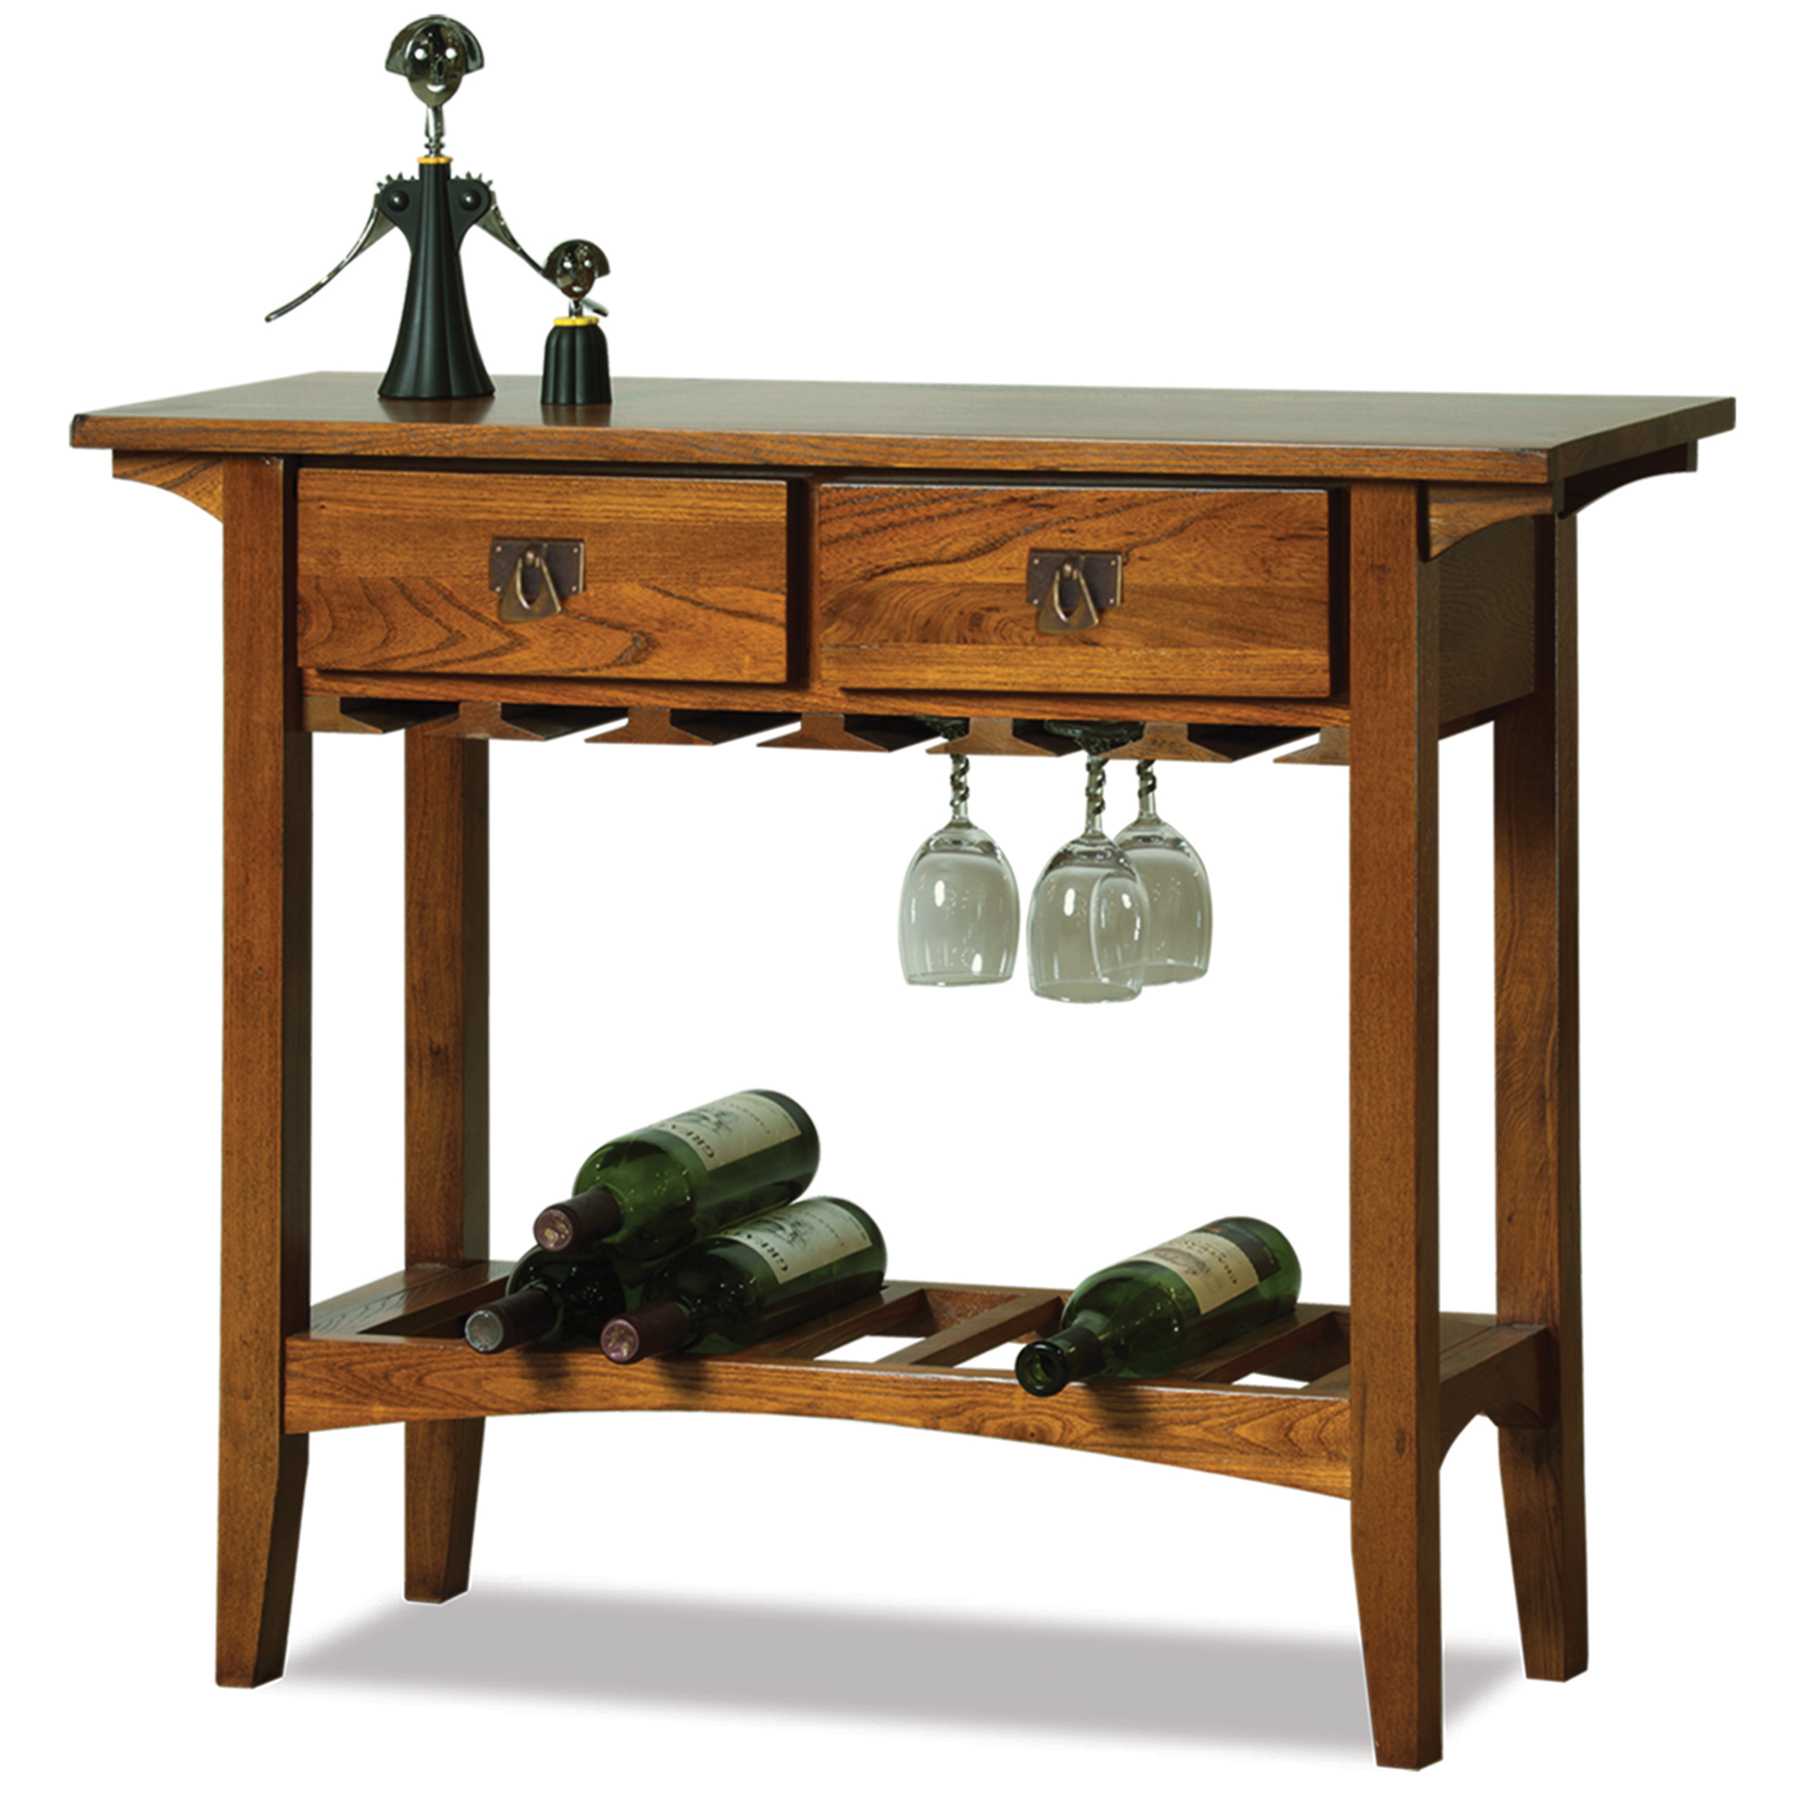 Leick Mission Wine Table with Storage Drawers - Russet Finish